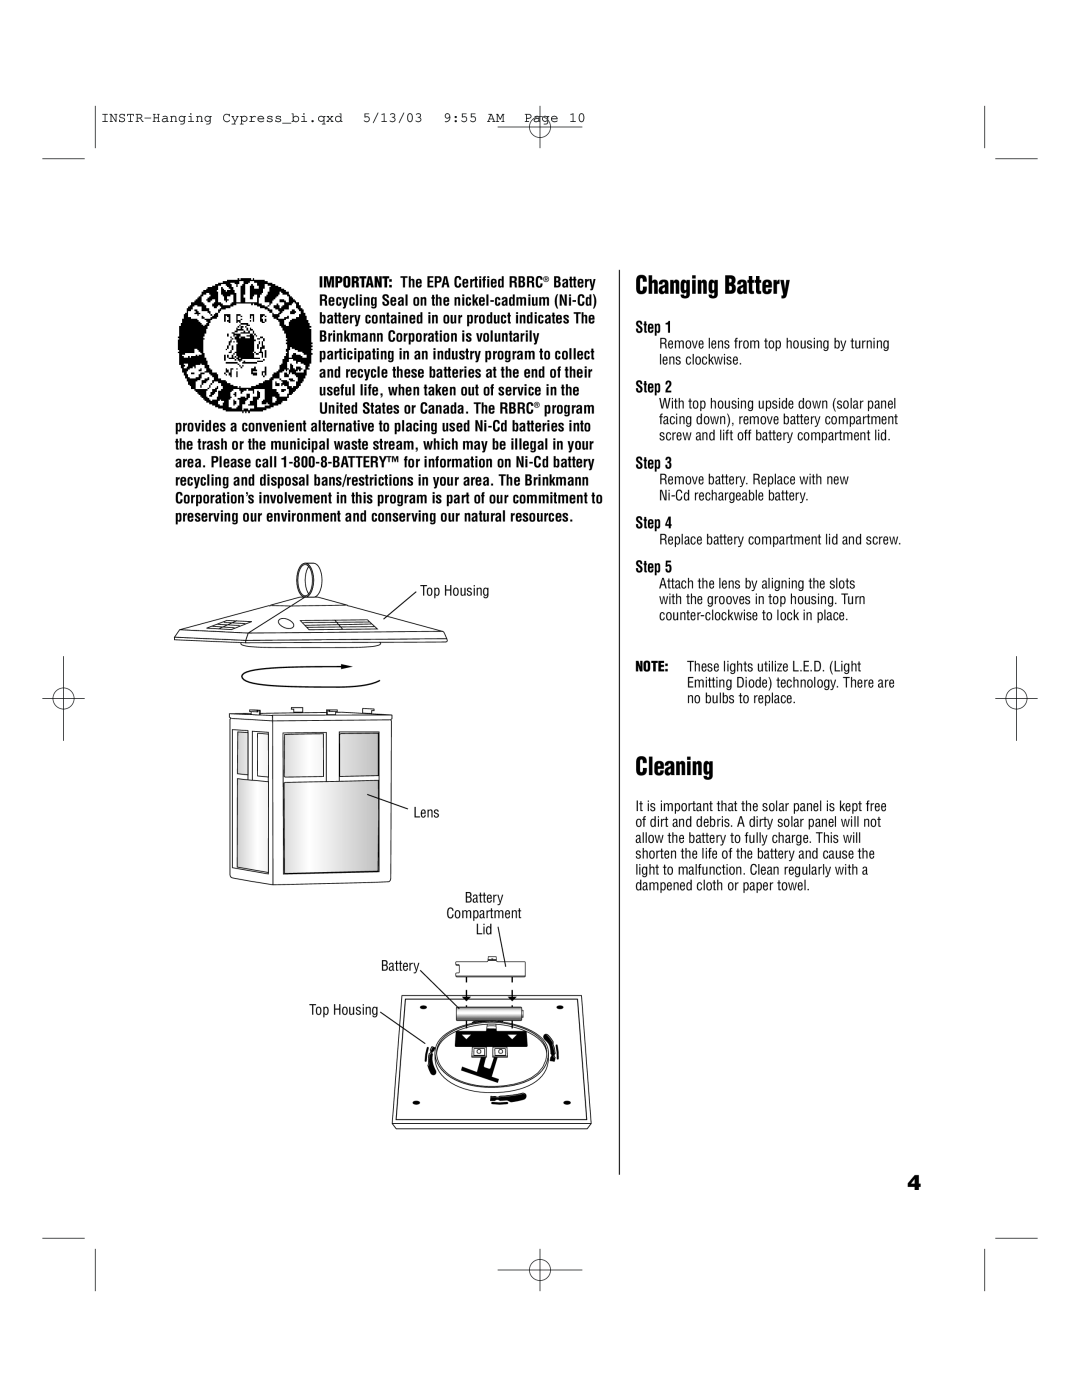 Brinkmann 822-1506-B owner manual Changing Battery, Cleaning, INSTR-Hanging Cypressbi.qxd 5/13/03 955 AM Page, Step 